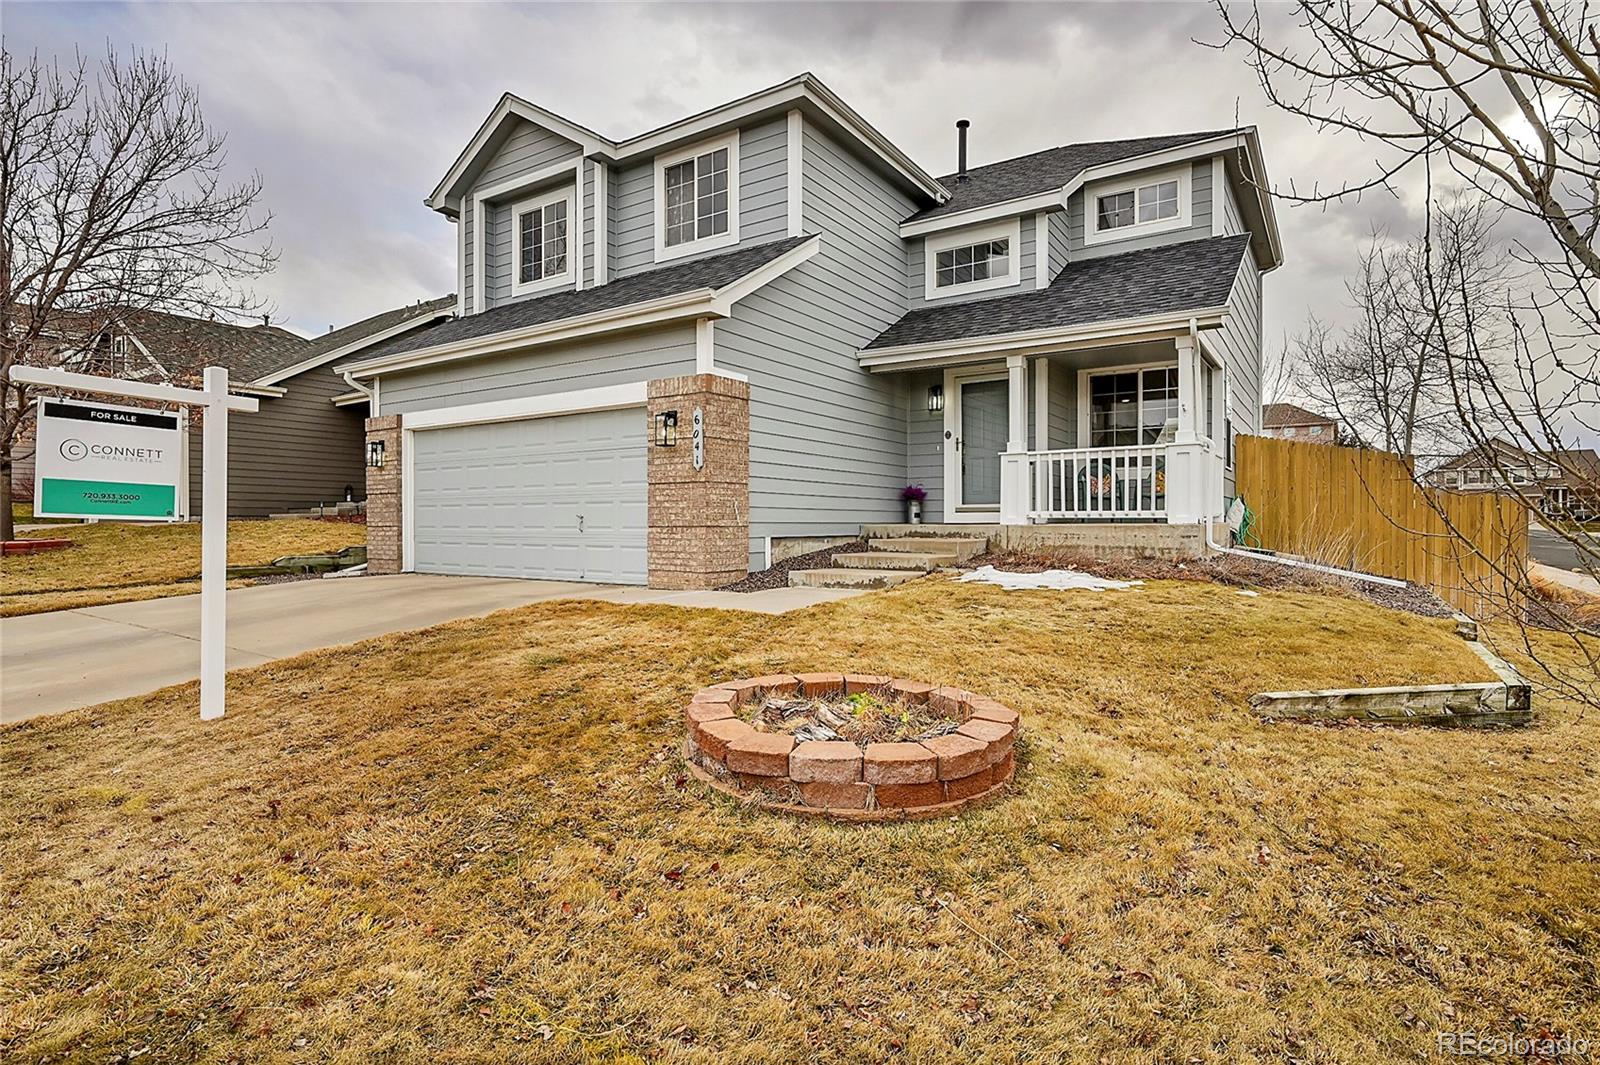 6041 s valdai way, Aurora sold home. Closed on 2024-04-12 for $550,000.